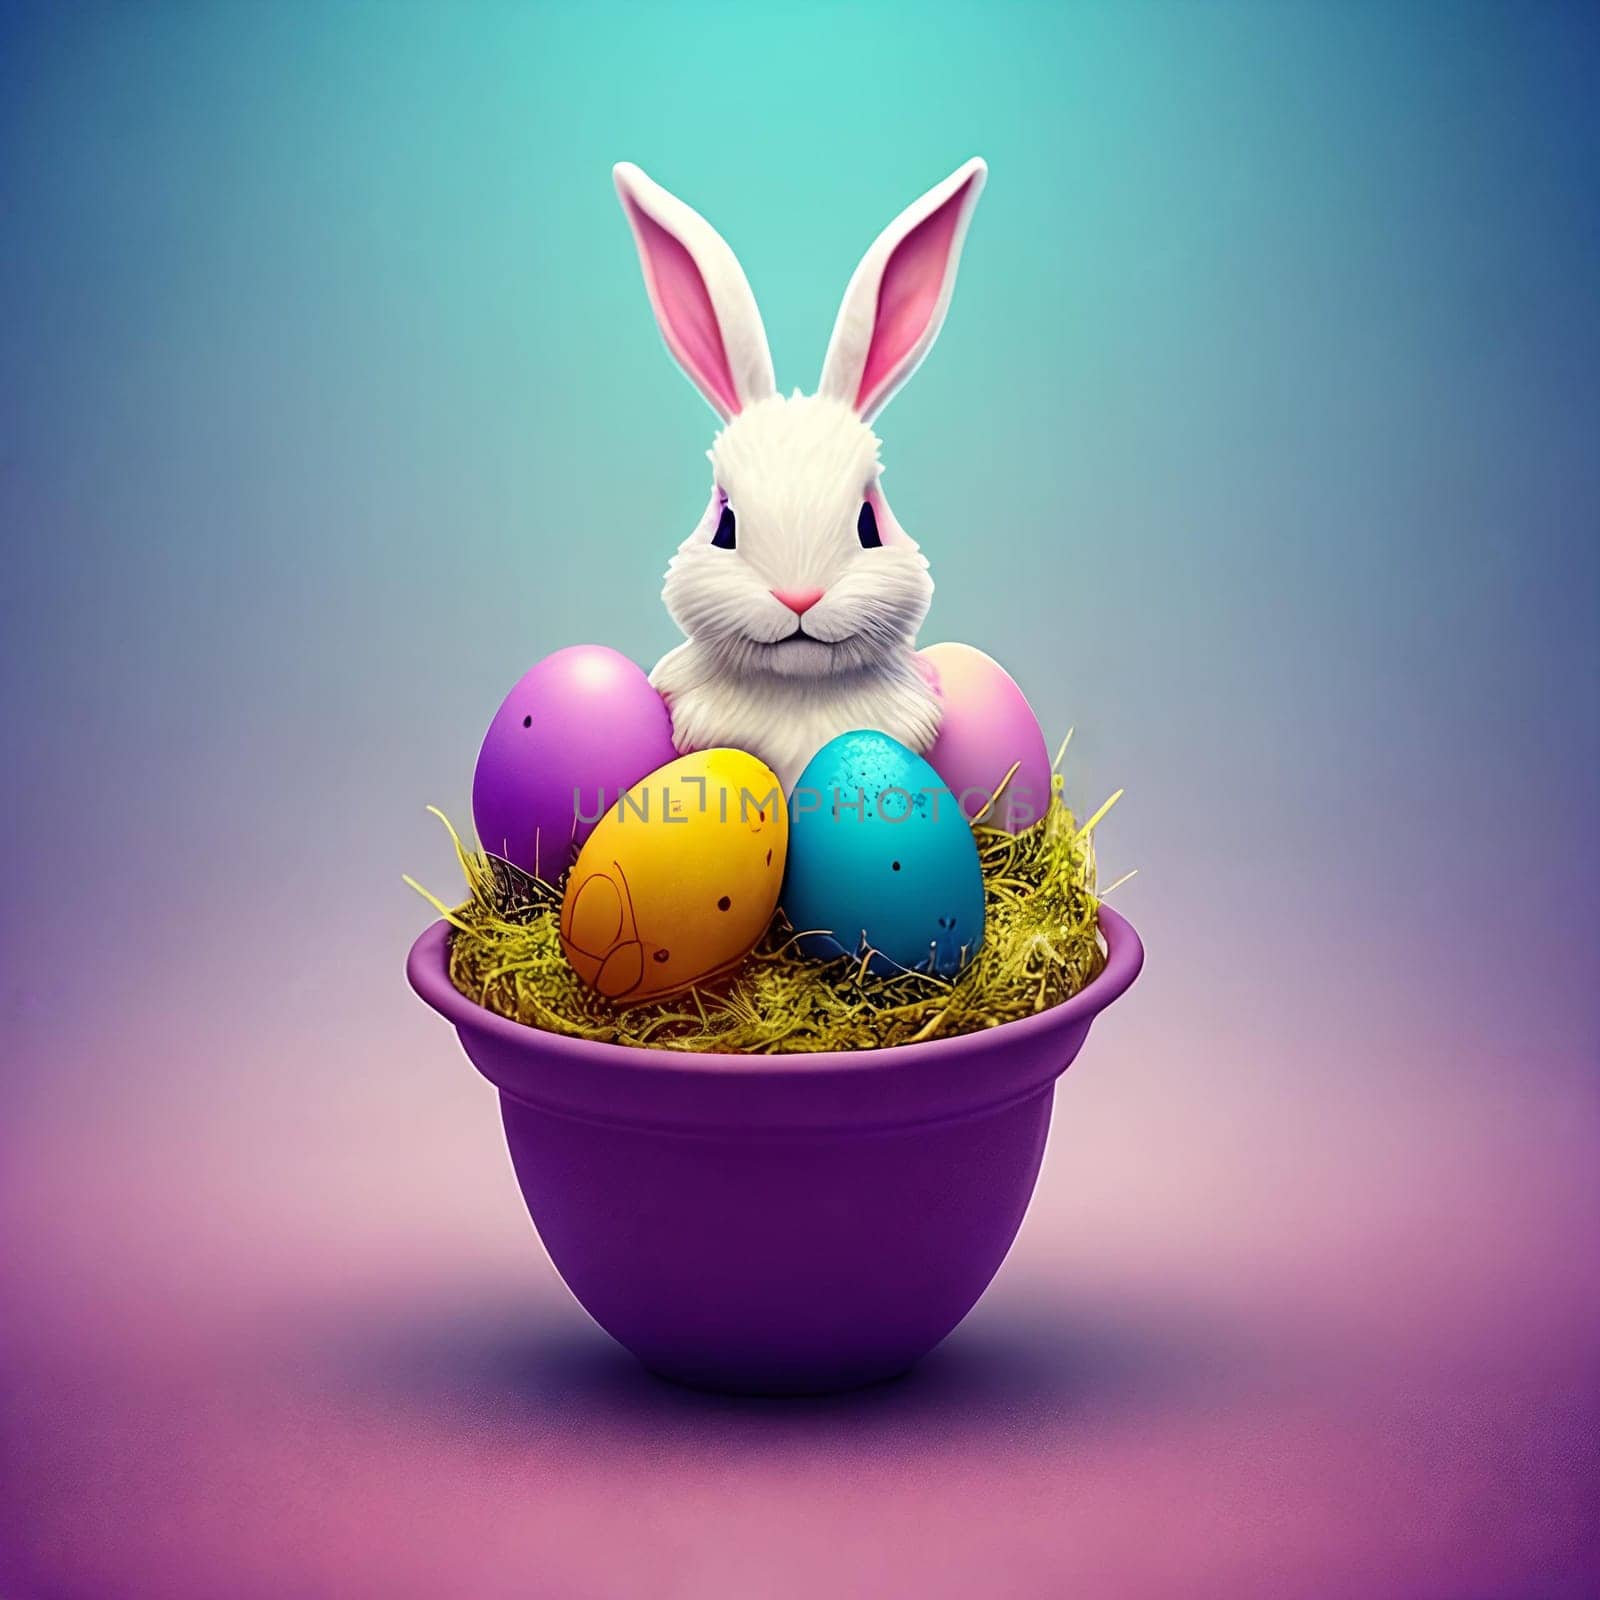 An enchanting illustration featuring a cute bunny surrounded by colorful Easter eggs, creating a heartwarming and festive vibe. Ideal for spreading joy and cheer during the holiday season